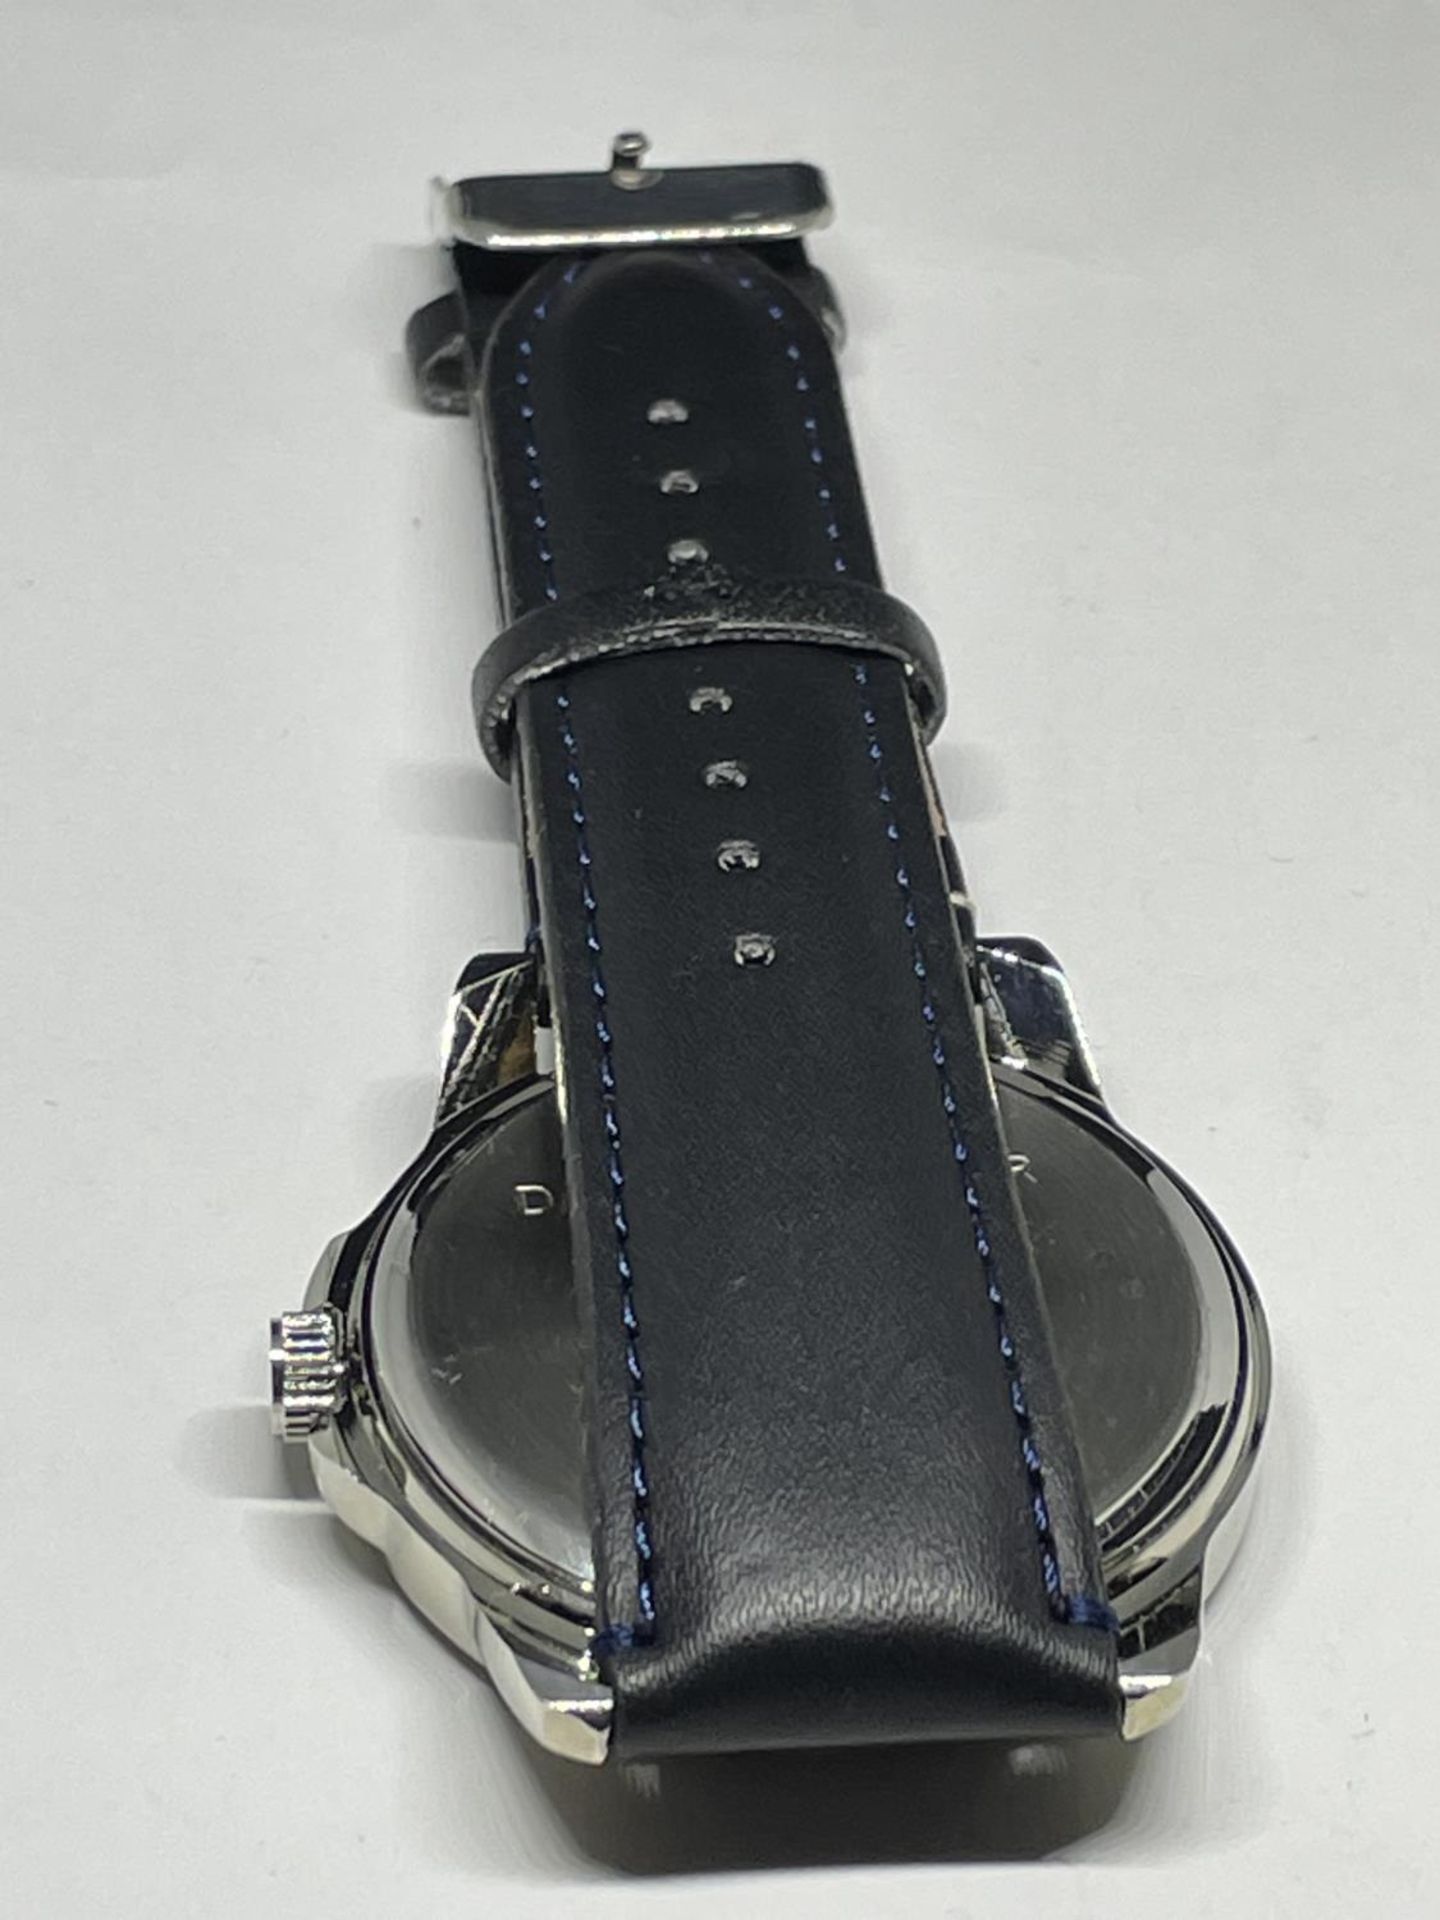 A GENTS FASHION WATCH SEEN WORKING BUT NO WARRANTY - Image 3 of 3